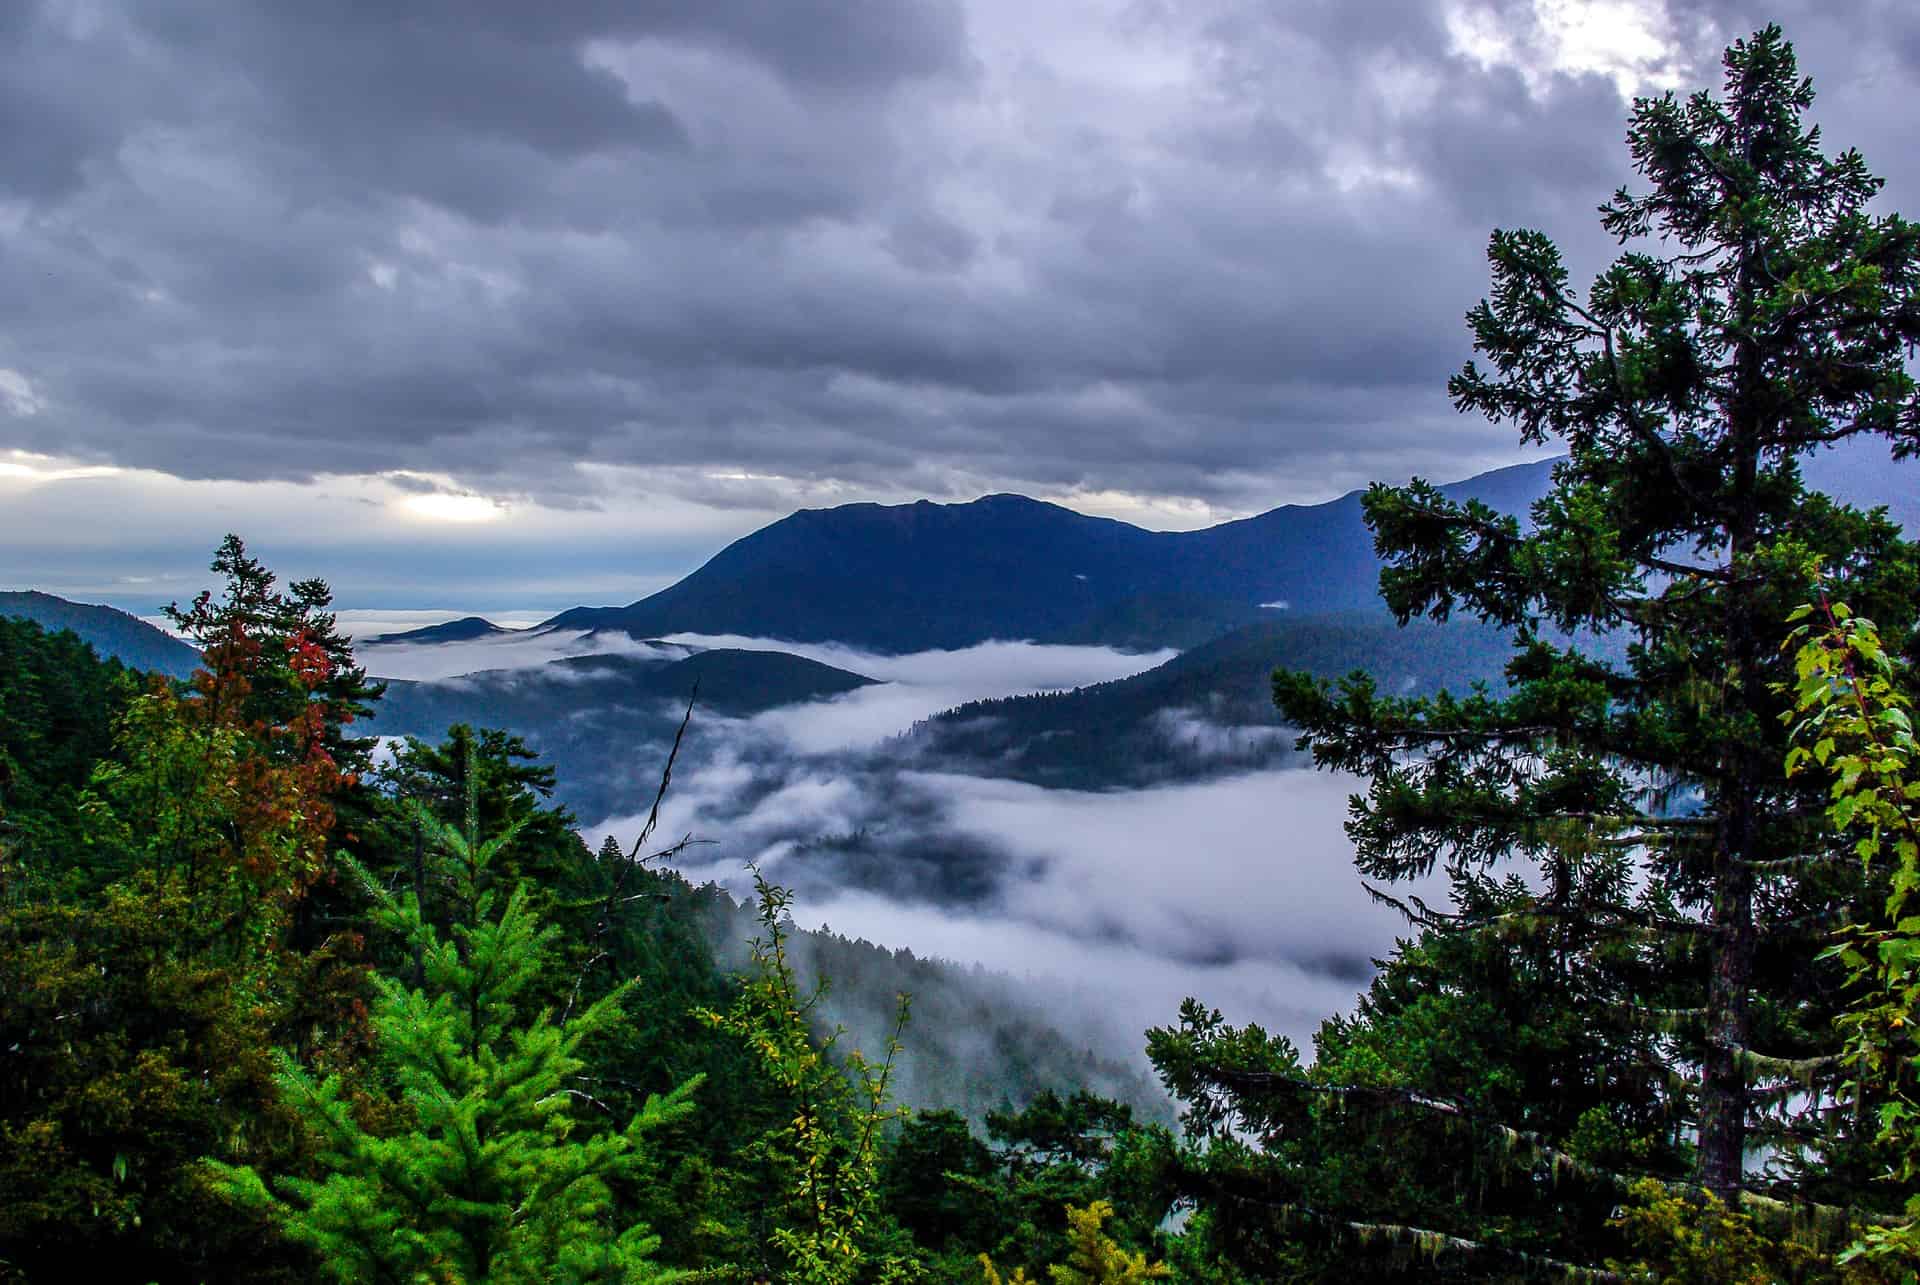 Mountains and evergreens with low cloud